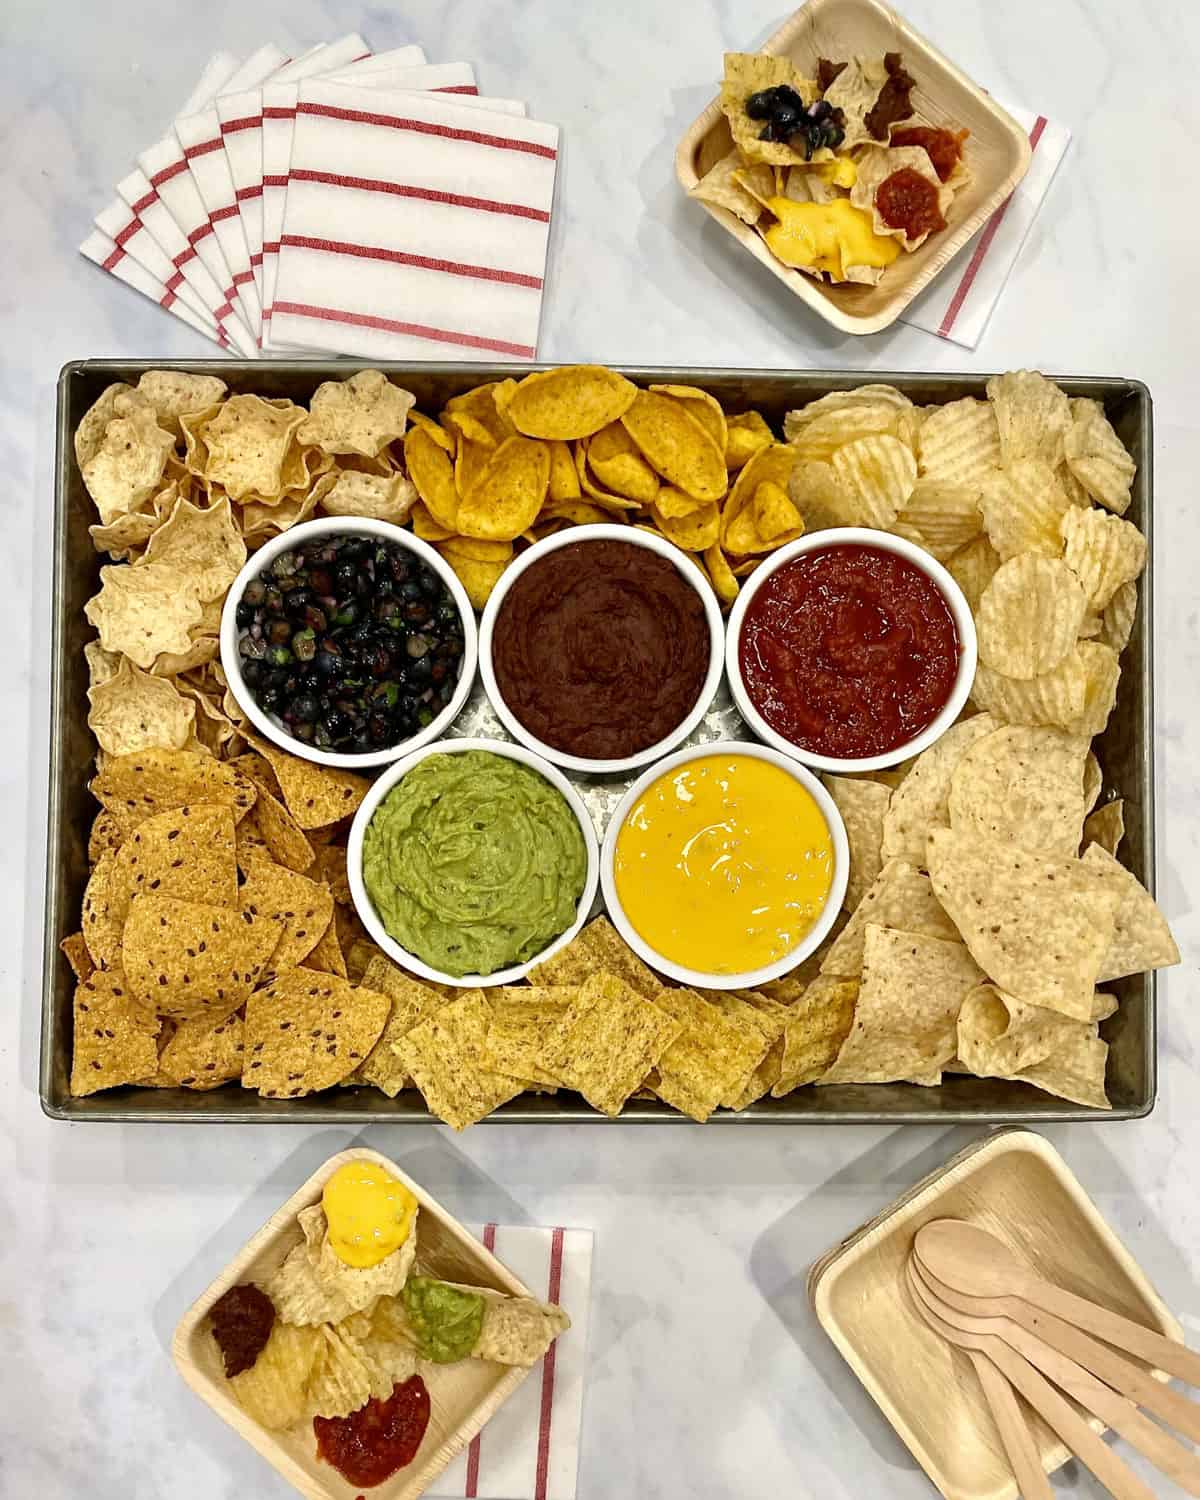 Olympic Chips and Dips Tray by The BakerMama